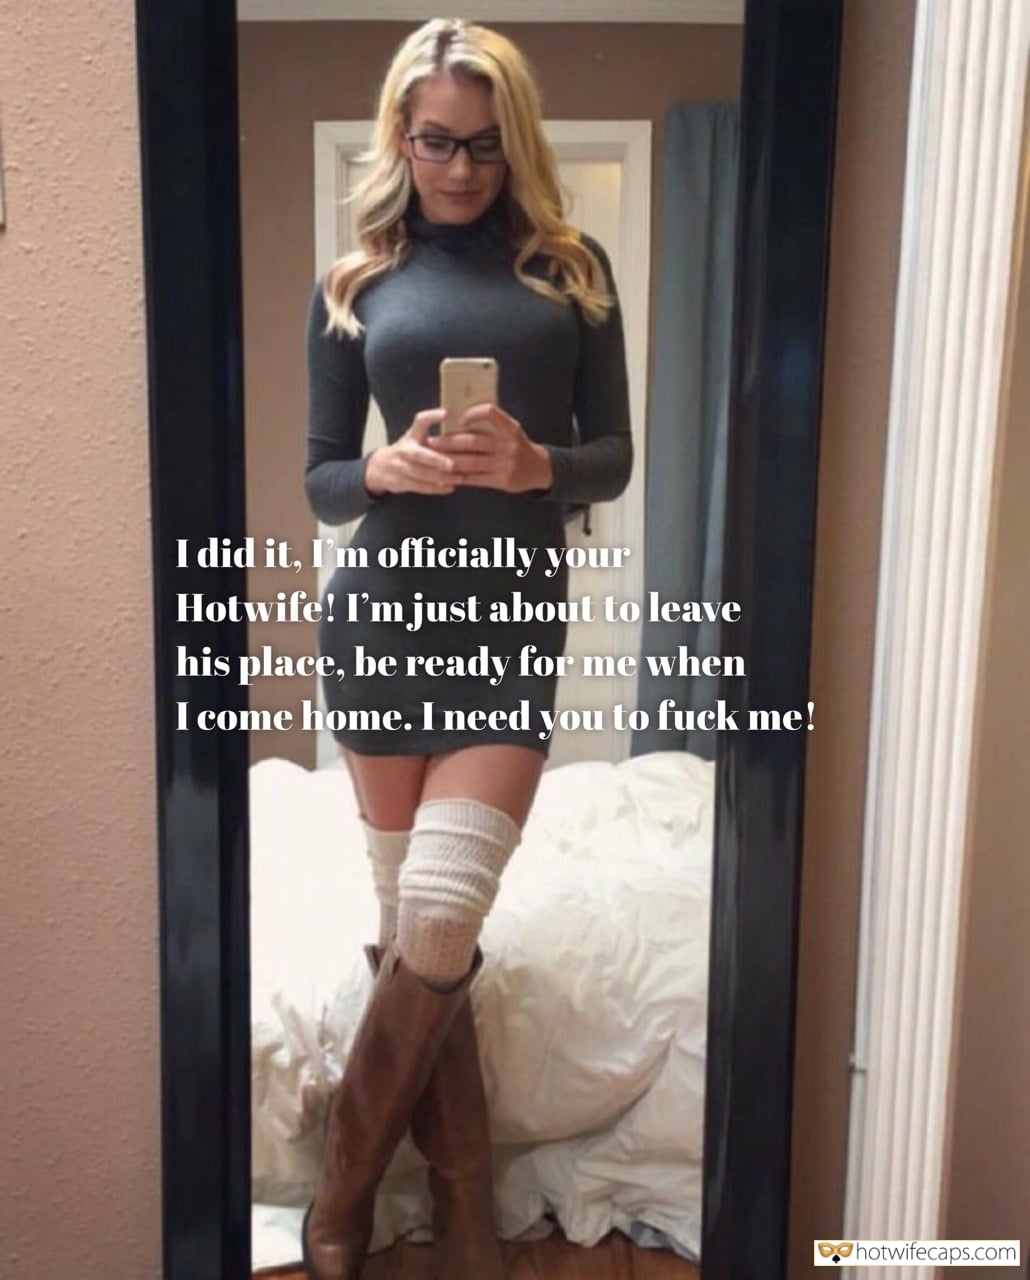 My Favorite hotwife caption: I did it, I’m officially your Hotwife! I’m just about to leave his place, be ready for me when I come home. I need you to fuck me! Come With the Cum in Pussy